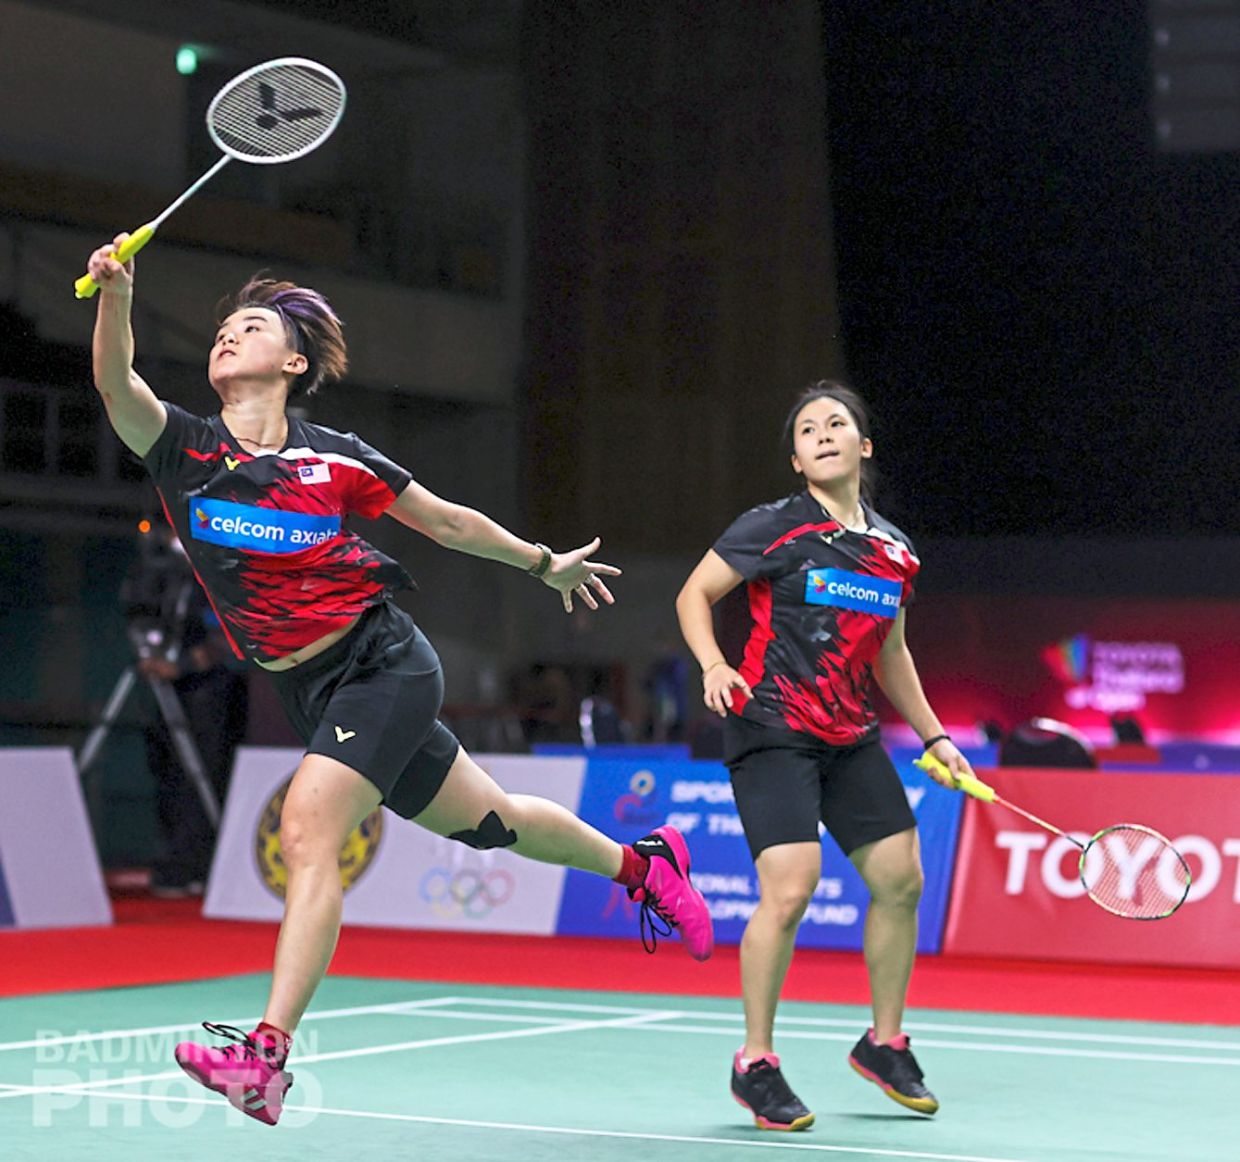 Yap and Hoo’s chances of reaching World Tour Finals get brighter